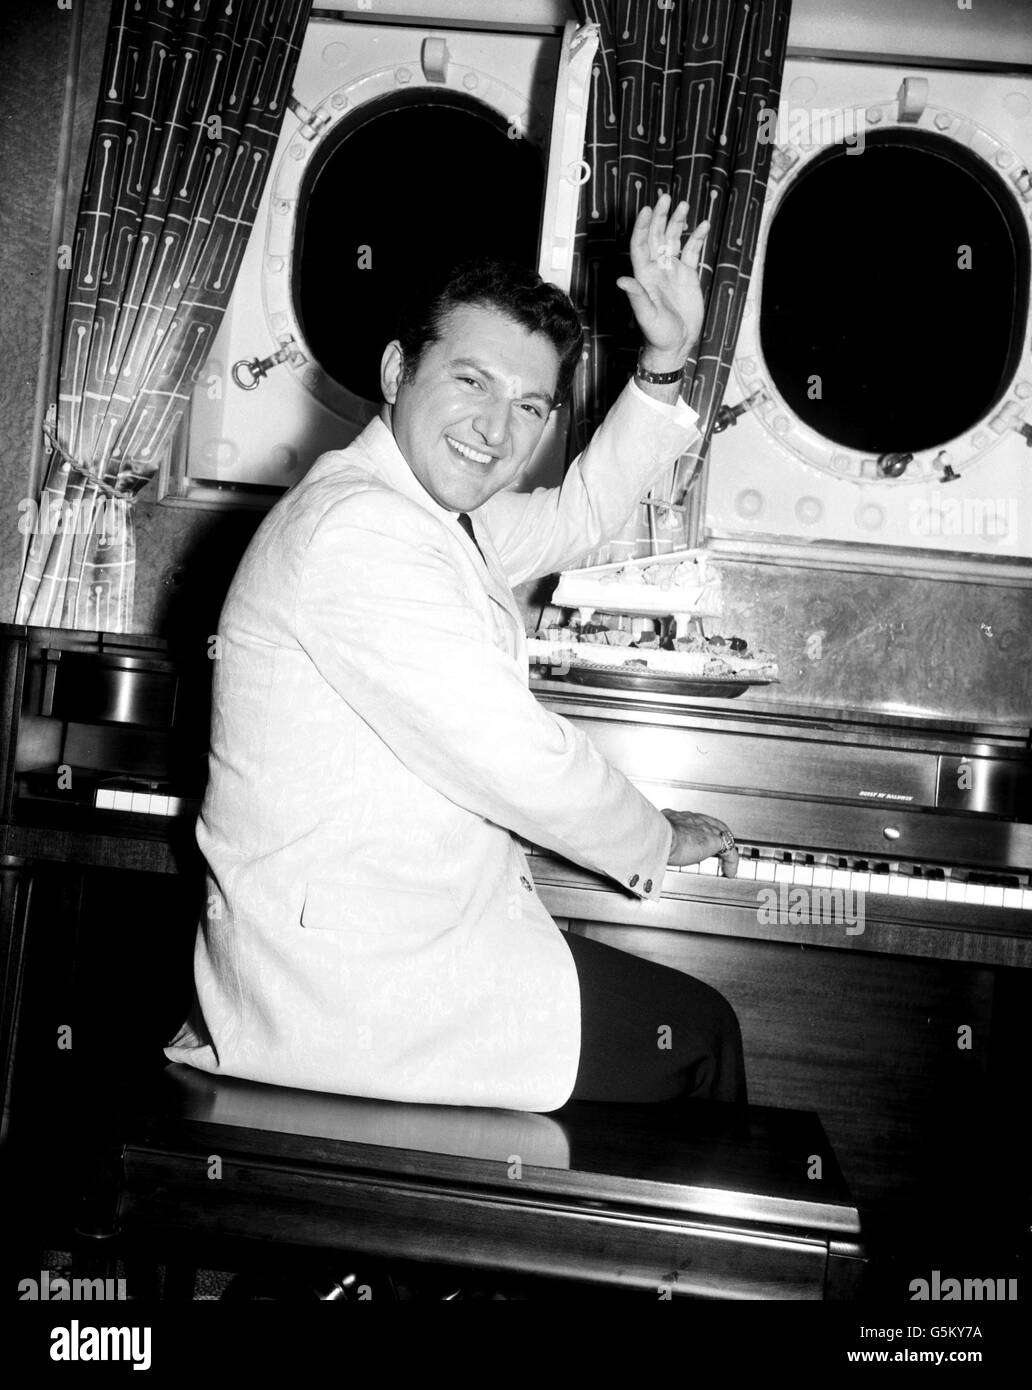 The well known smile and the twinkling fingers on the keyboard are seen in Britain again as American pianist Liberace arrives at Southampton aboard the Cunard liner Queen Elizabeth. Stock Photo